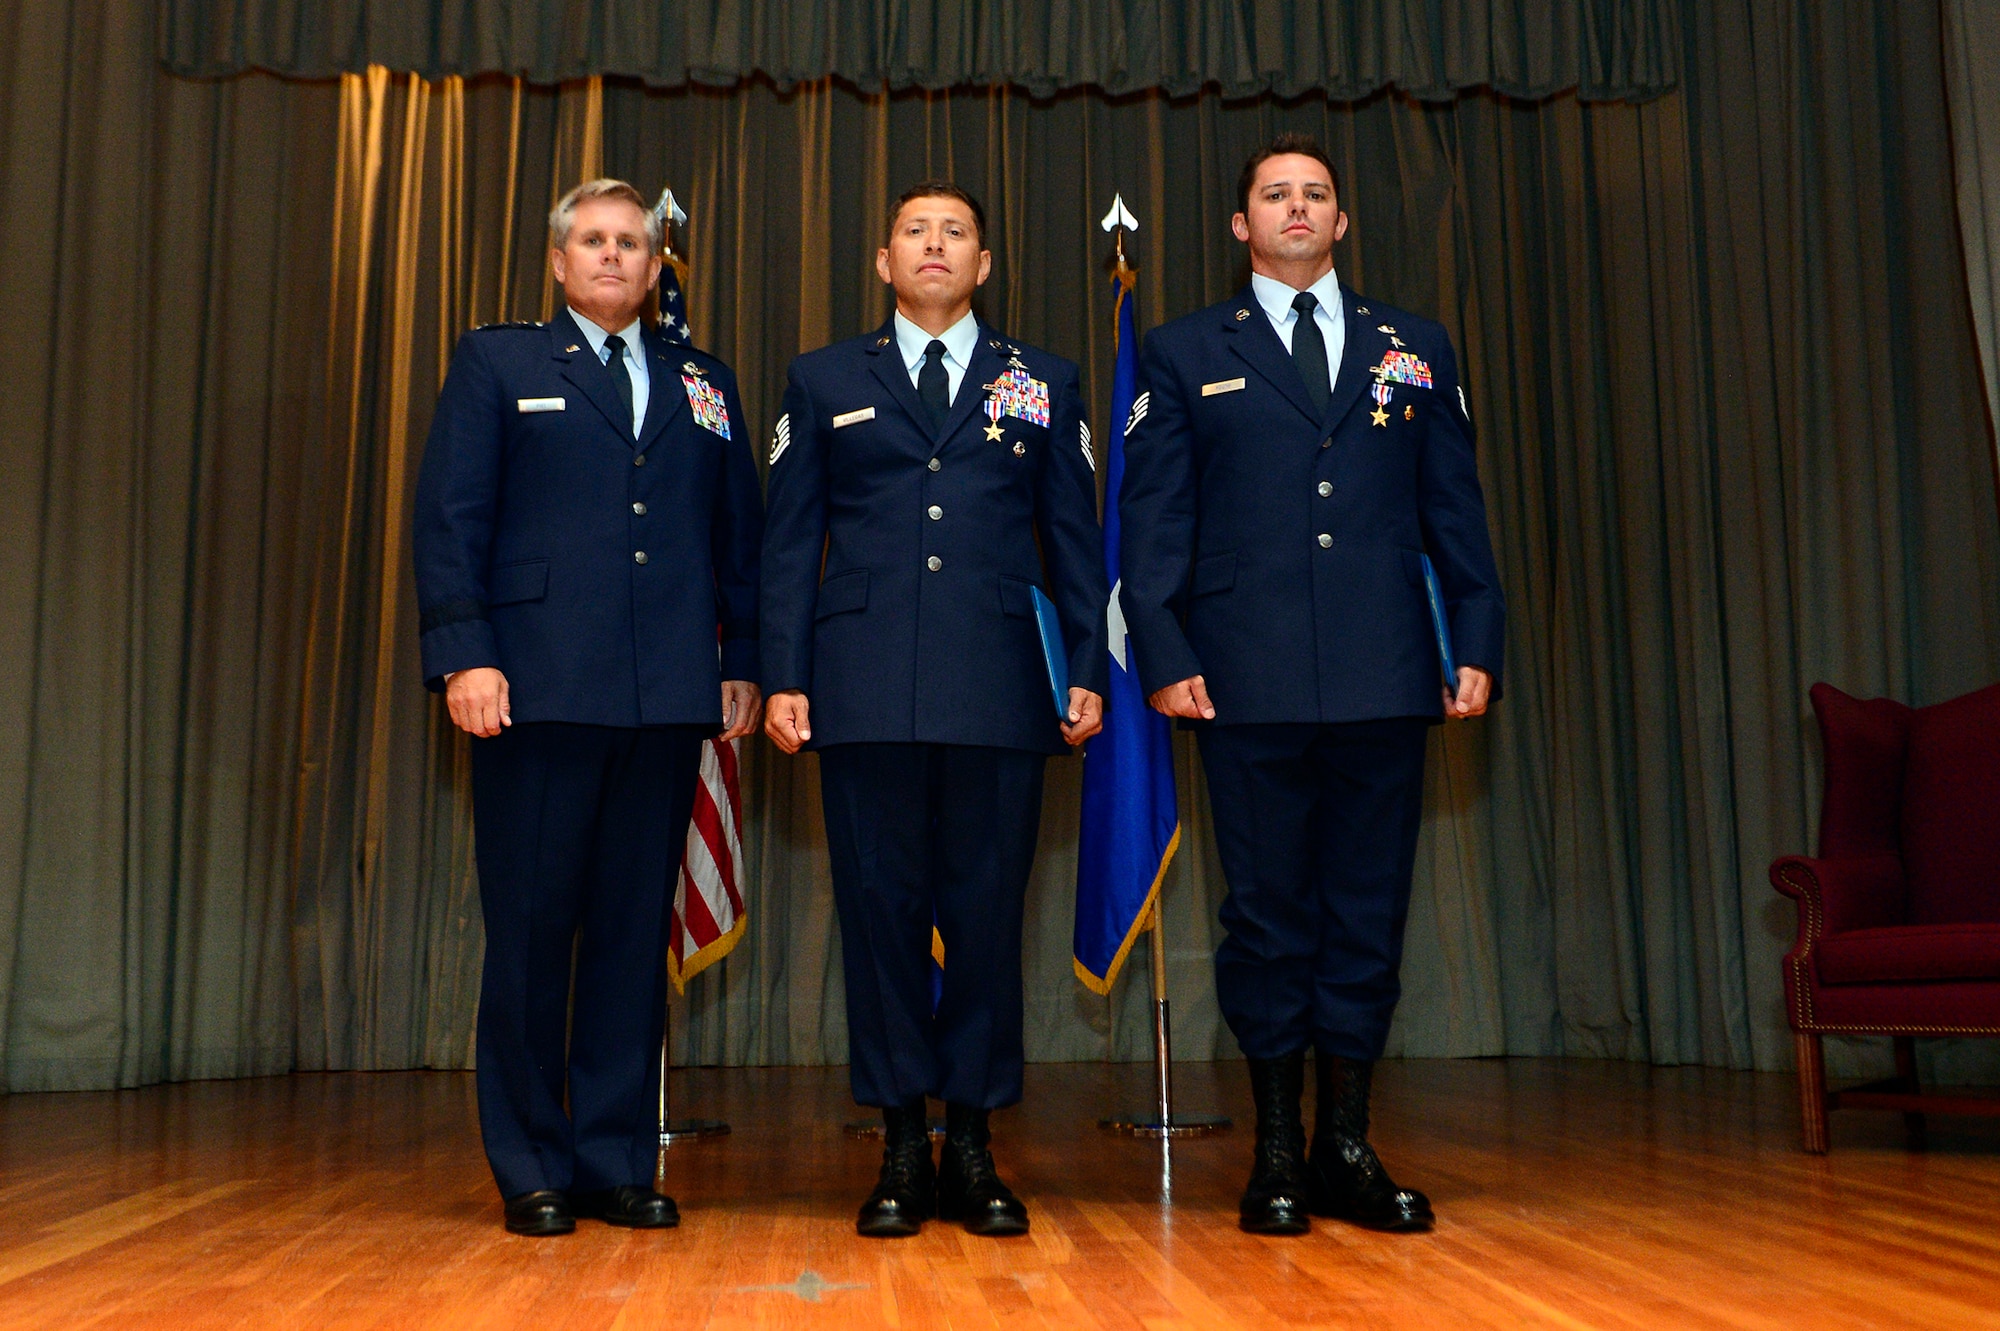 Lt. Gen. Eric E. Fiel, Commander, Air Force Special Operations
Command, poses with Tech. Sgt. Ismael Villegas, 24th Special Operations Wing
combat control recruit liaison, and Staff Sgt. Dale Young, 342nd Training
Squadron combat control instructor, after presenting them each with a Silver
Star, July 22, 2013. Villegas and Young were awarded Silver Stars for their
actions against enemy forces in Afghanistan. (U.S. Air Force photo by Staff
Sgt. Vernon Young Jr./Released)
